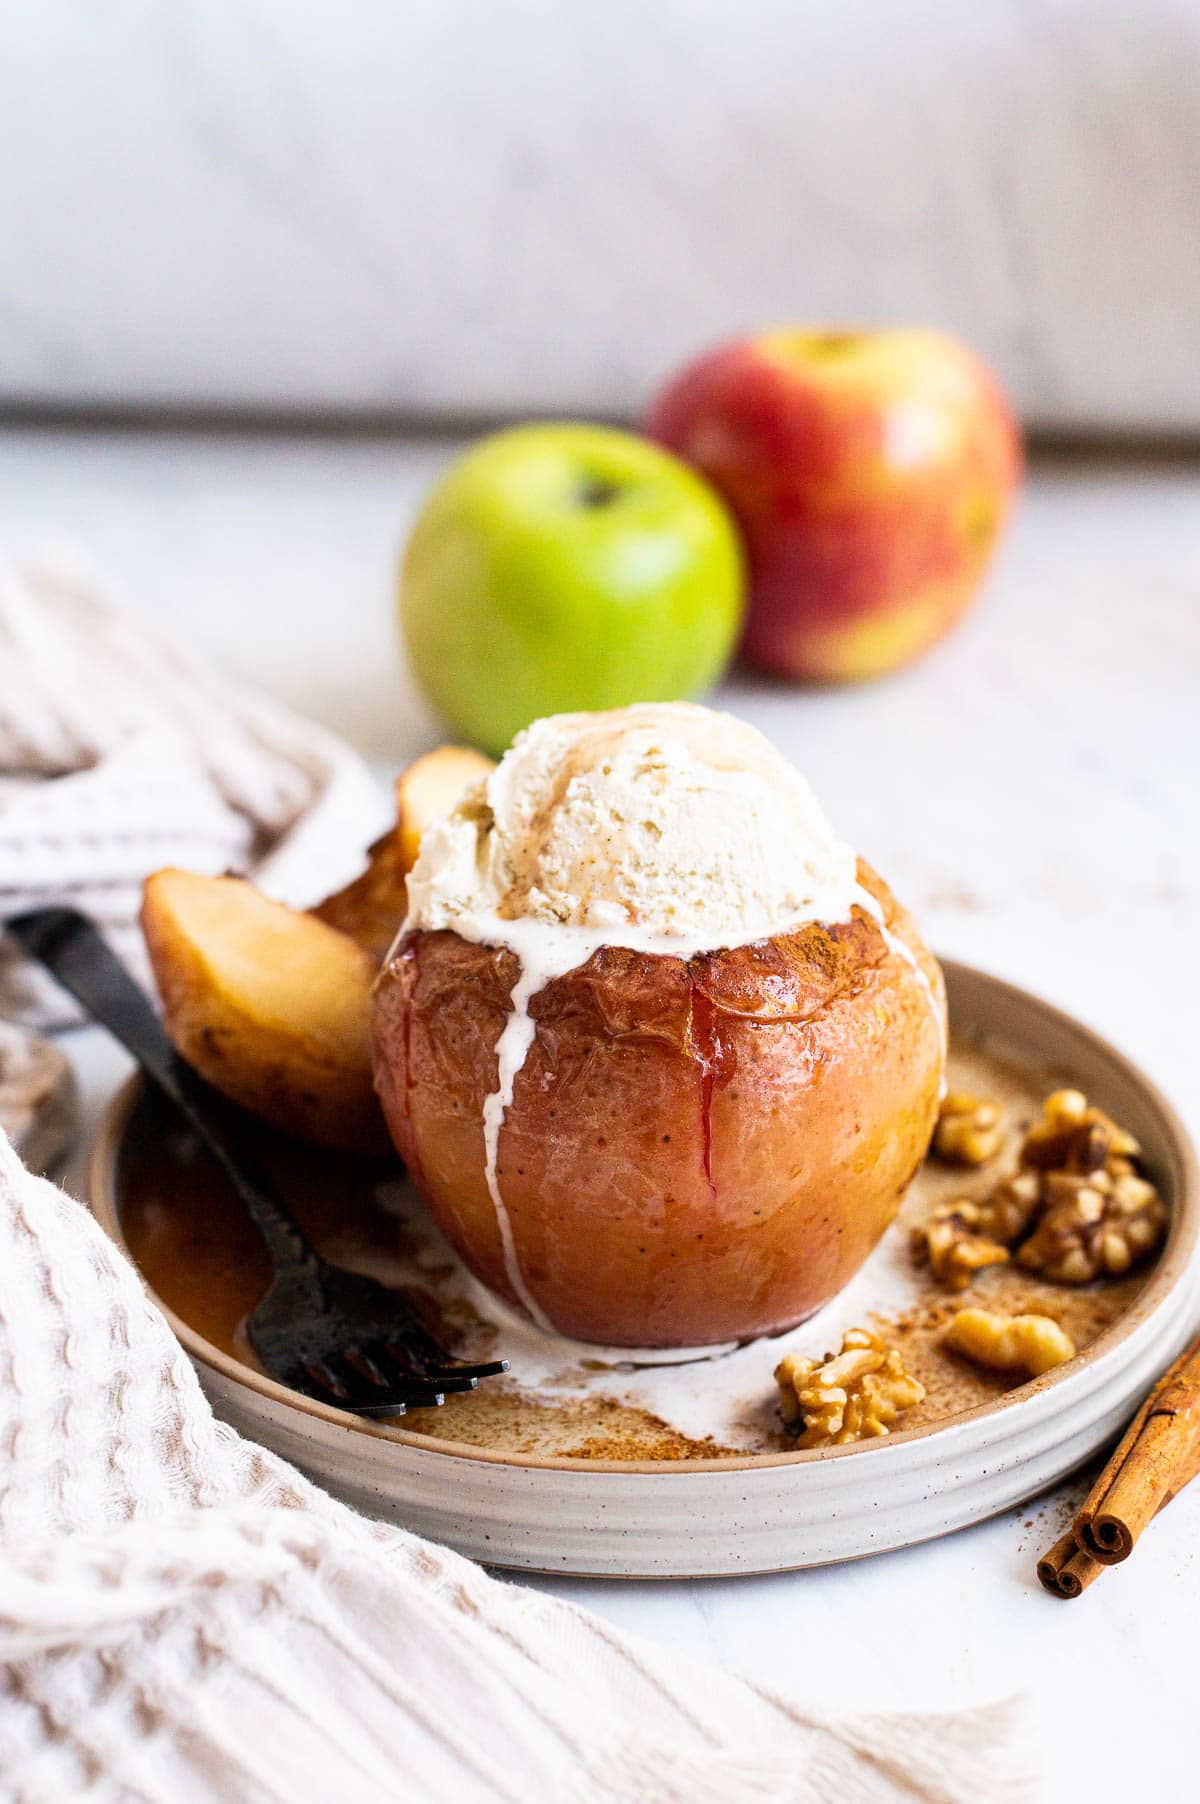 Healthy baked apple with a scoop of vanilla ice cream on a plate with a fork. Fresh apples in background.